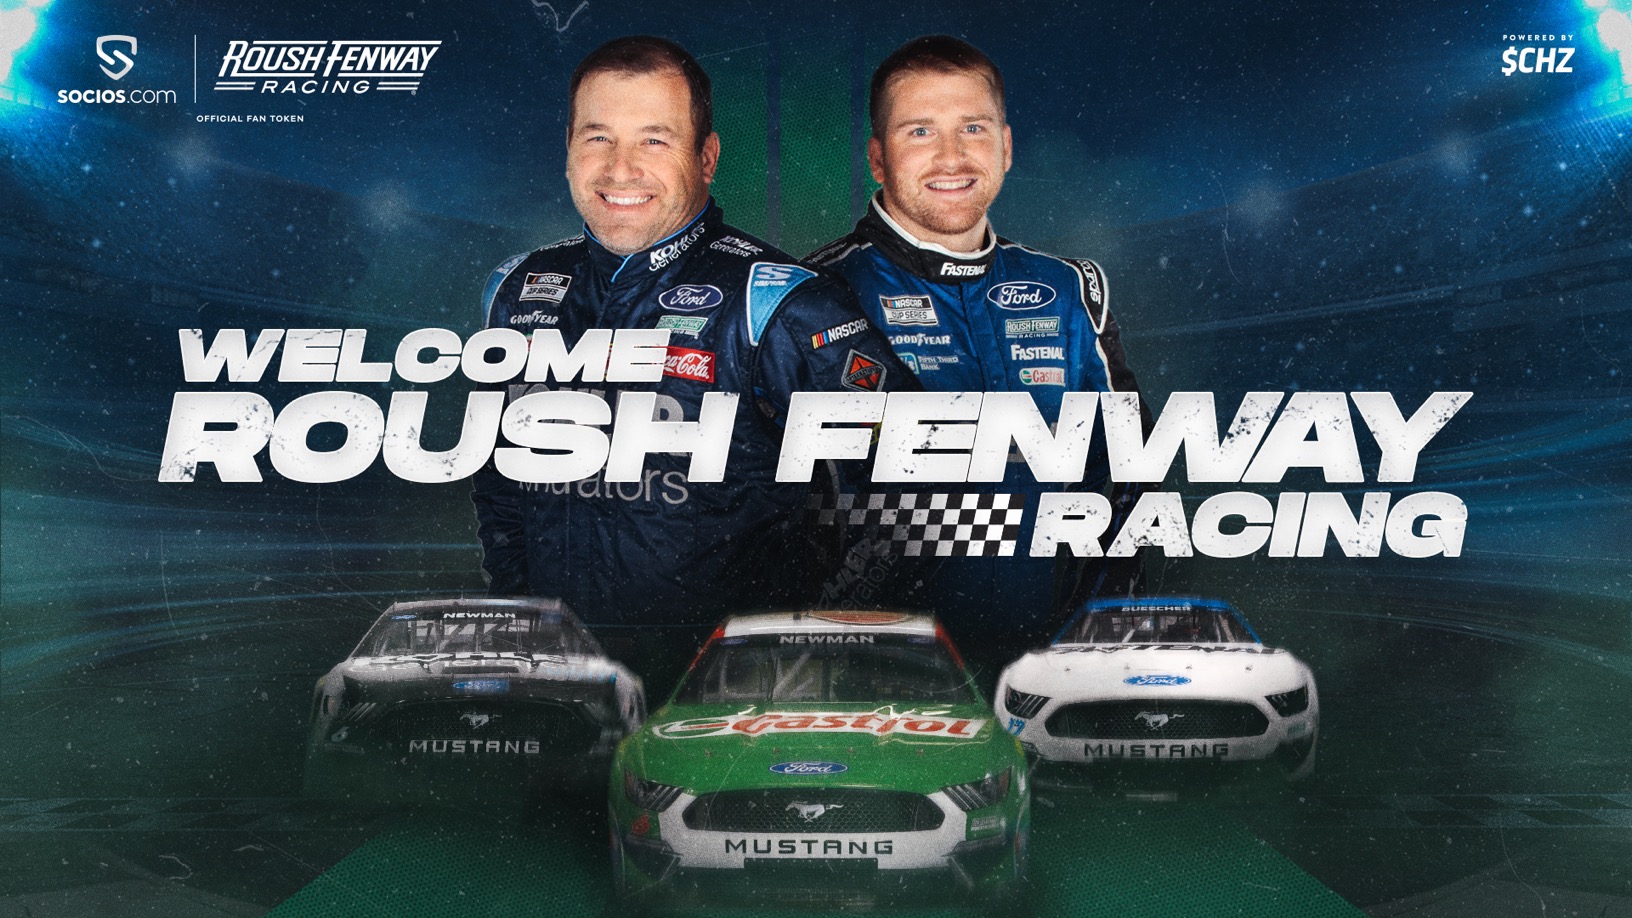 NASCAR’S ROUSH FENWAY RACING TO BECOME FIRST US SPORTS TEAM TO LAUNCH FAN TOKEN ON SOCIOS.COM